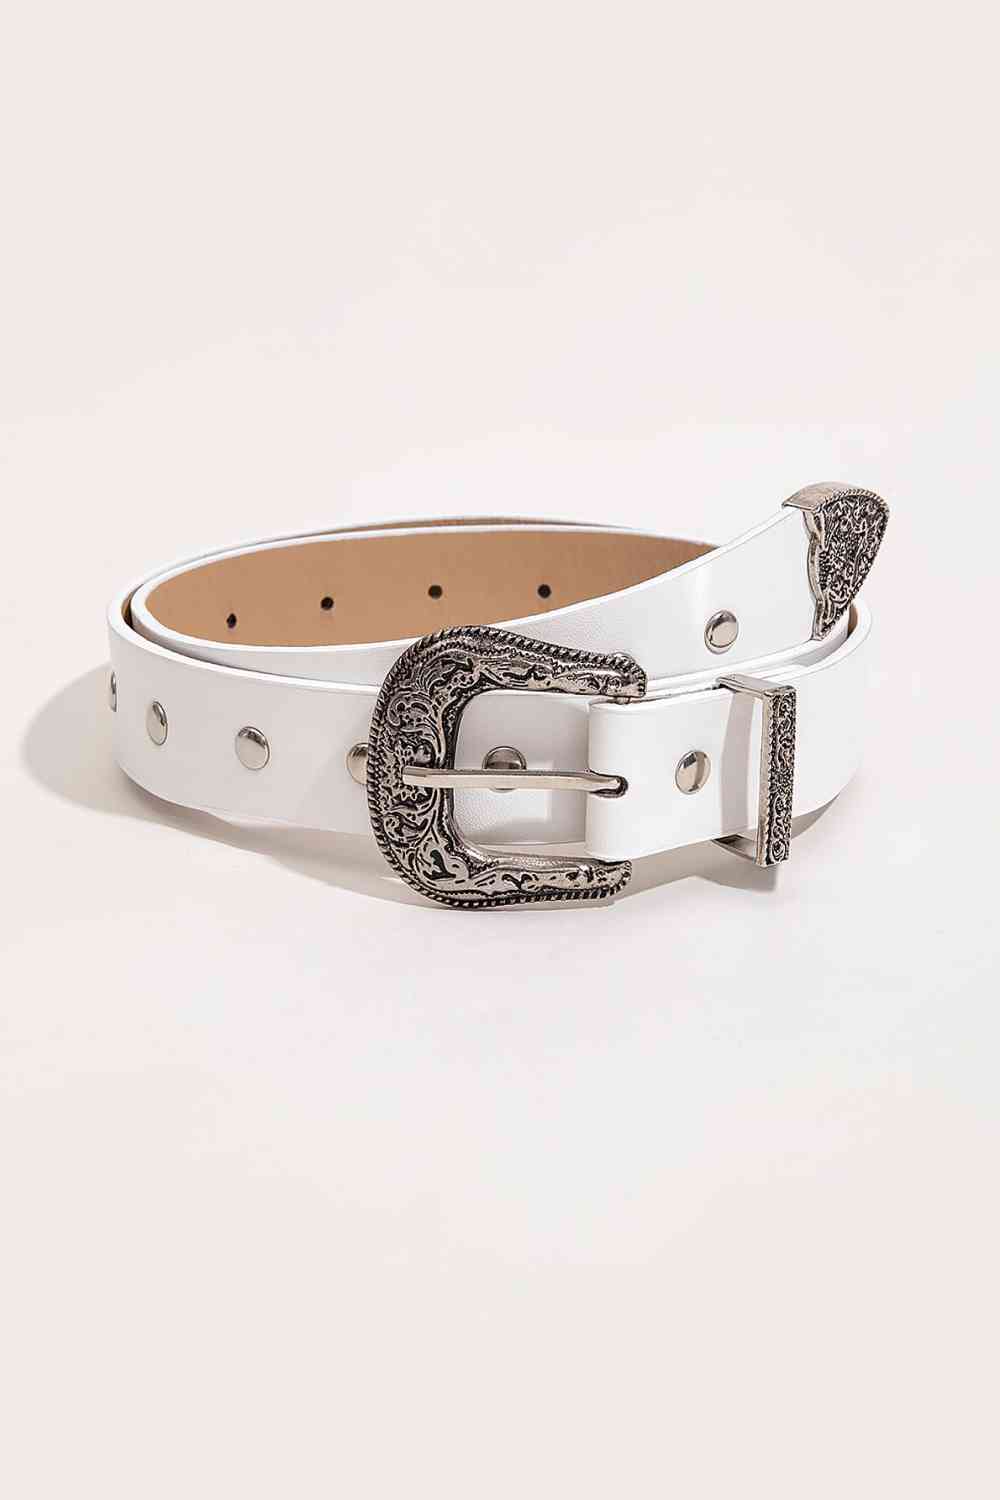 Beige PU Leather Studded Belt Sentient Beauty Fashions Apparel & Accessories